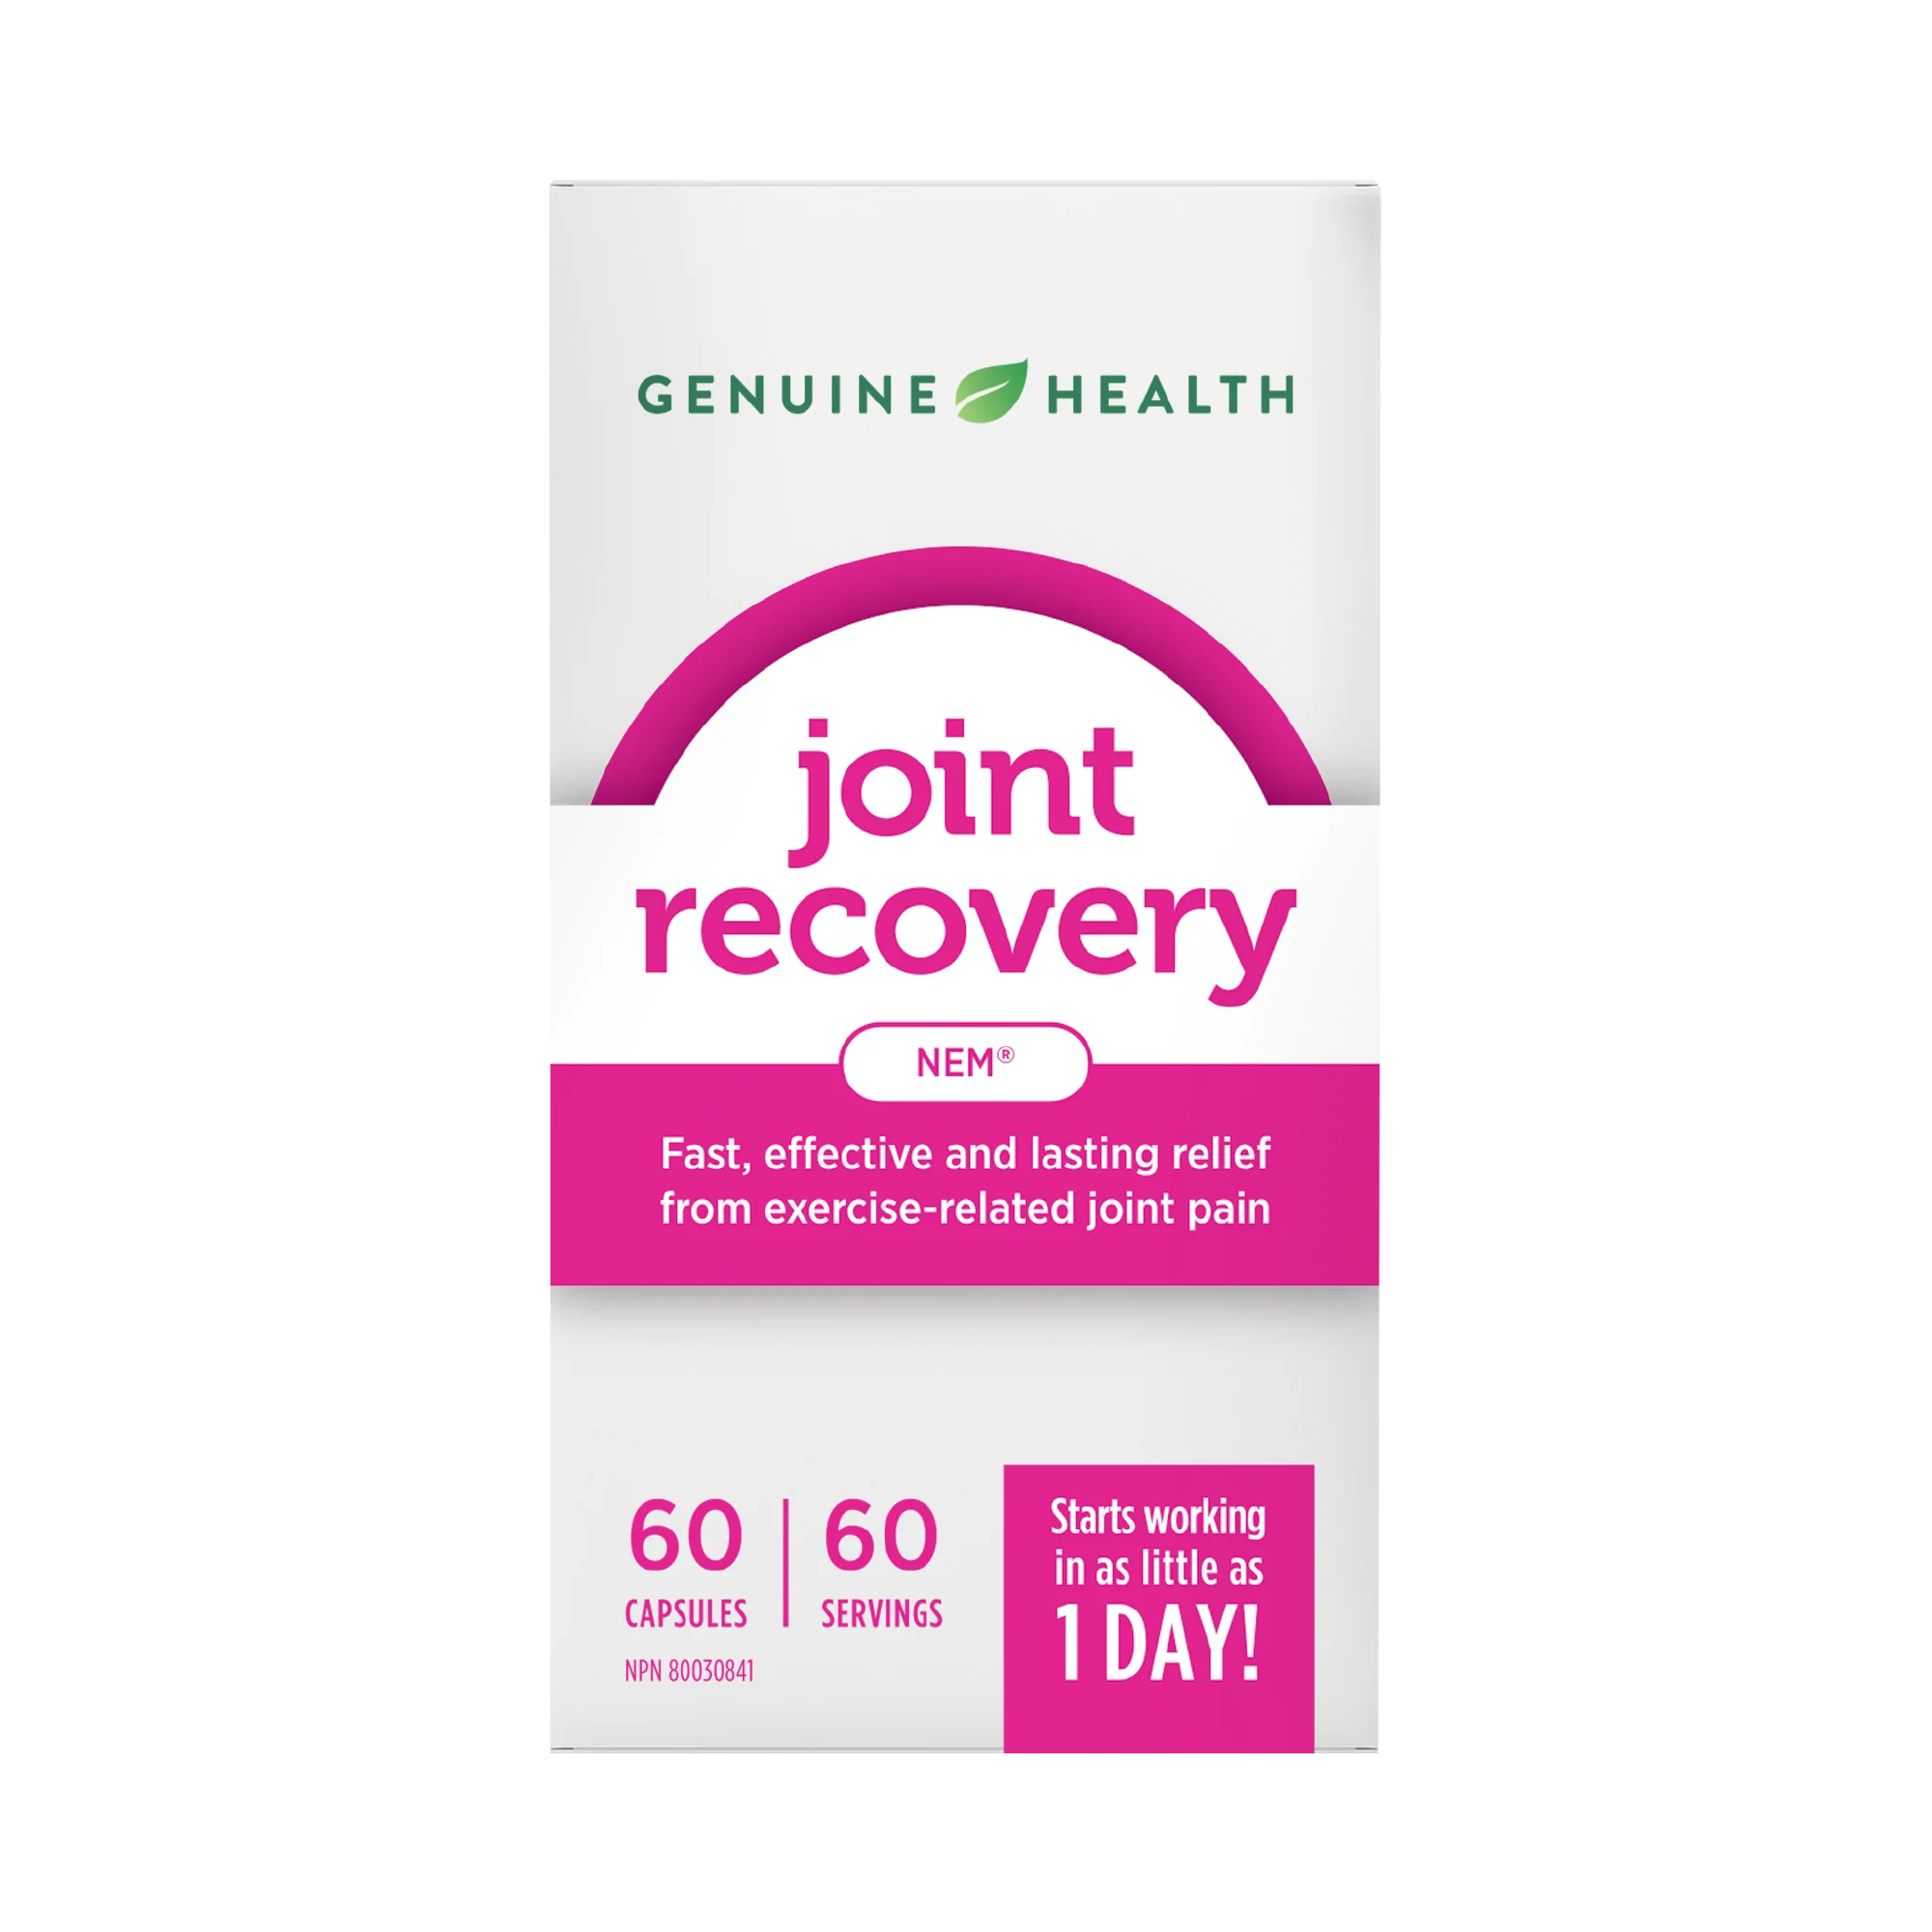 Genuine Health Joint Recovery